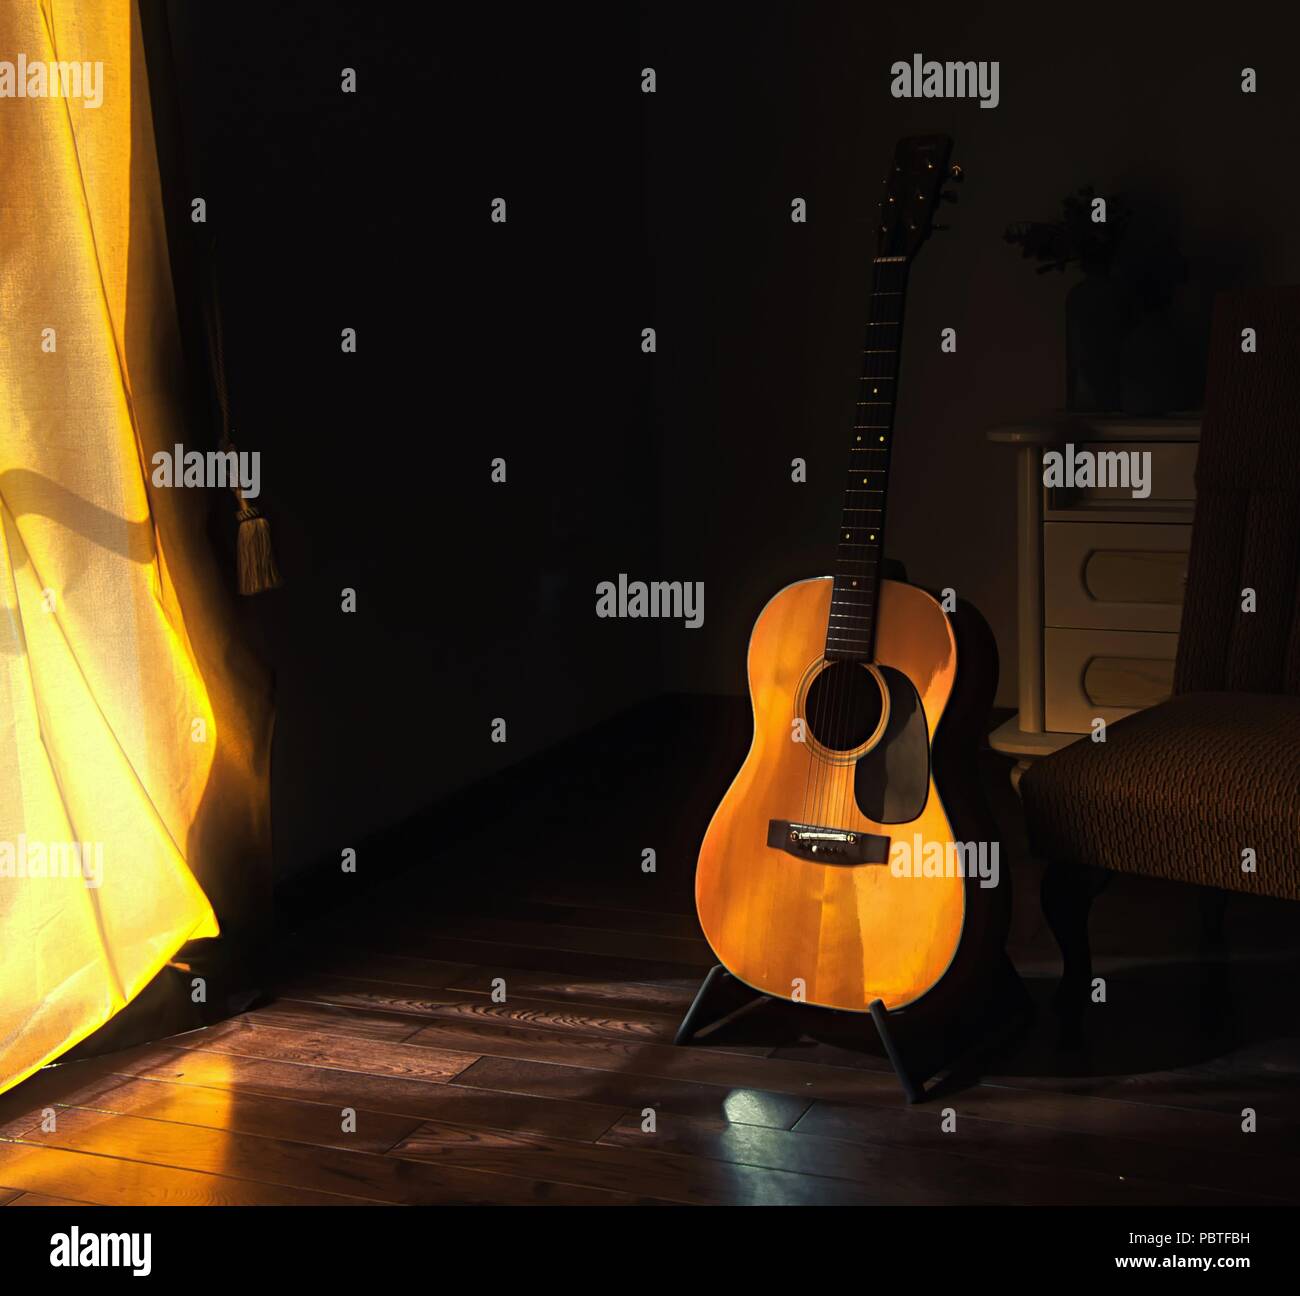 Acoustic Spanish guitar on a stand in the moody shadows of a dark room with bright light coming in from behind a curtain Stock Photo